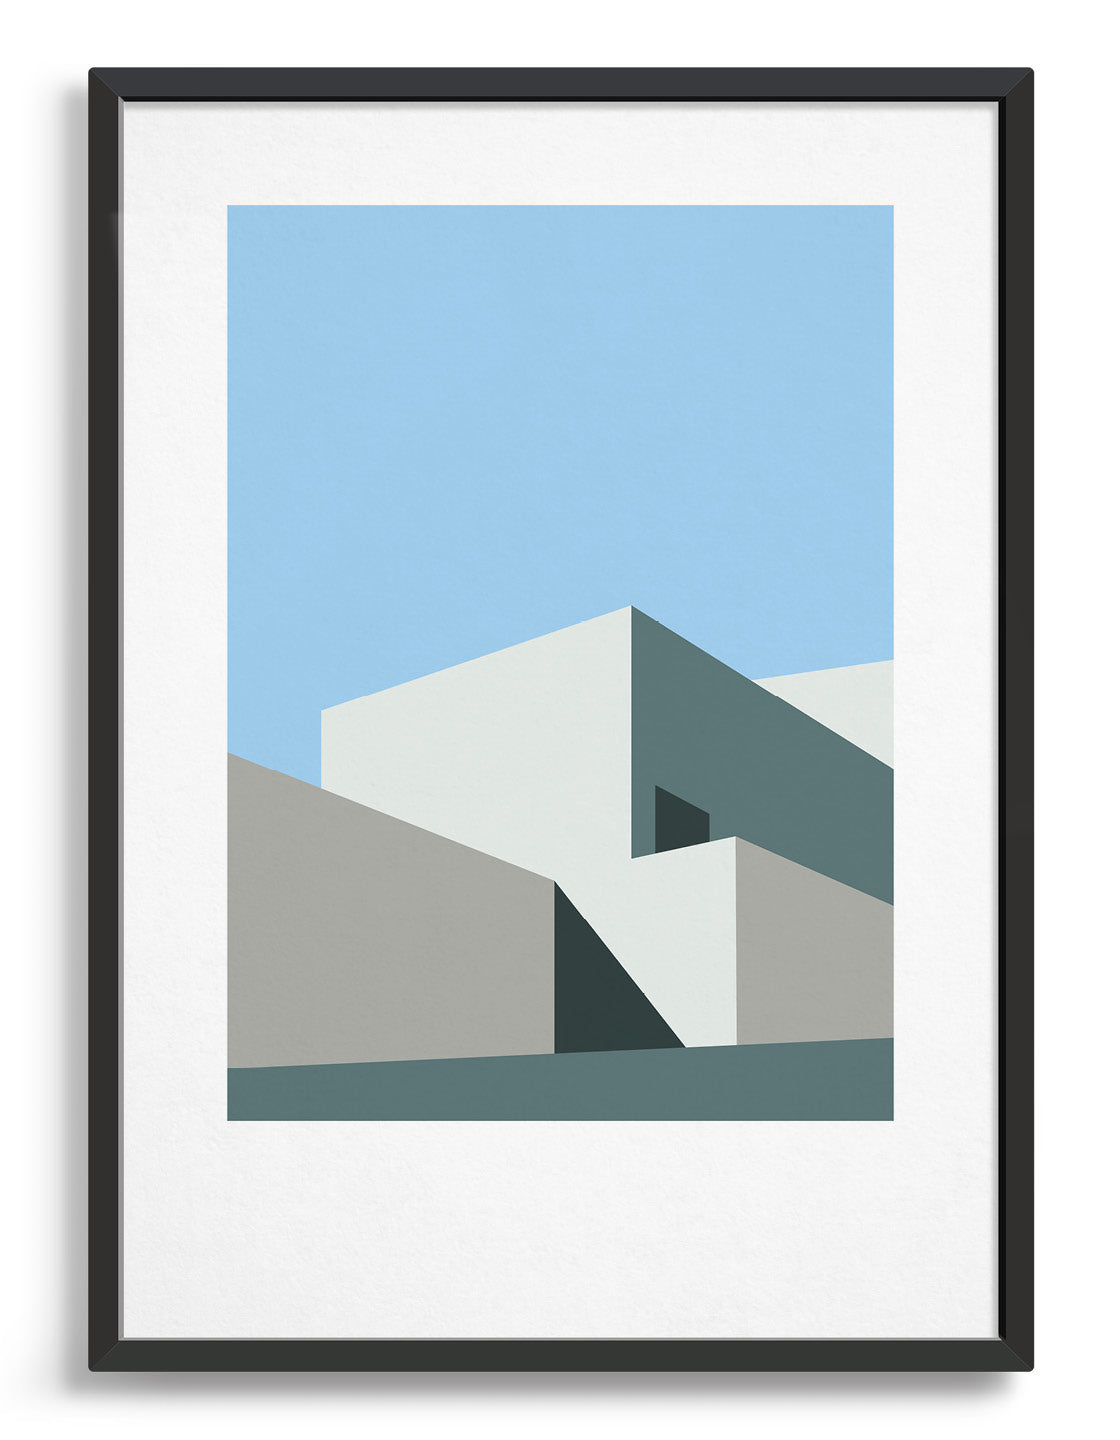 Abstract geometric art prints / Minimal architecture for modern home decor